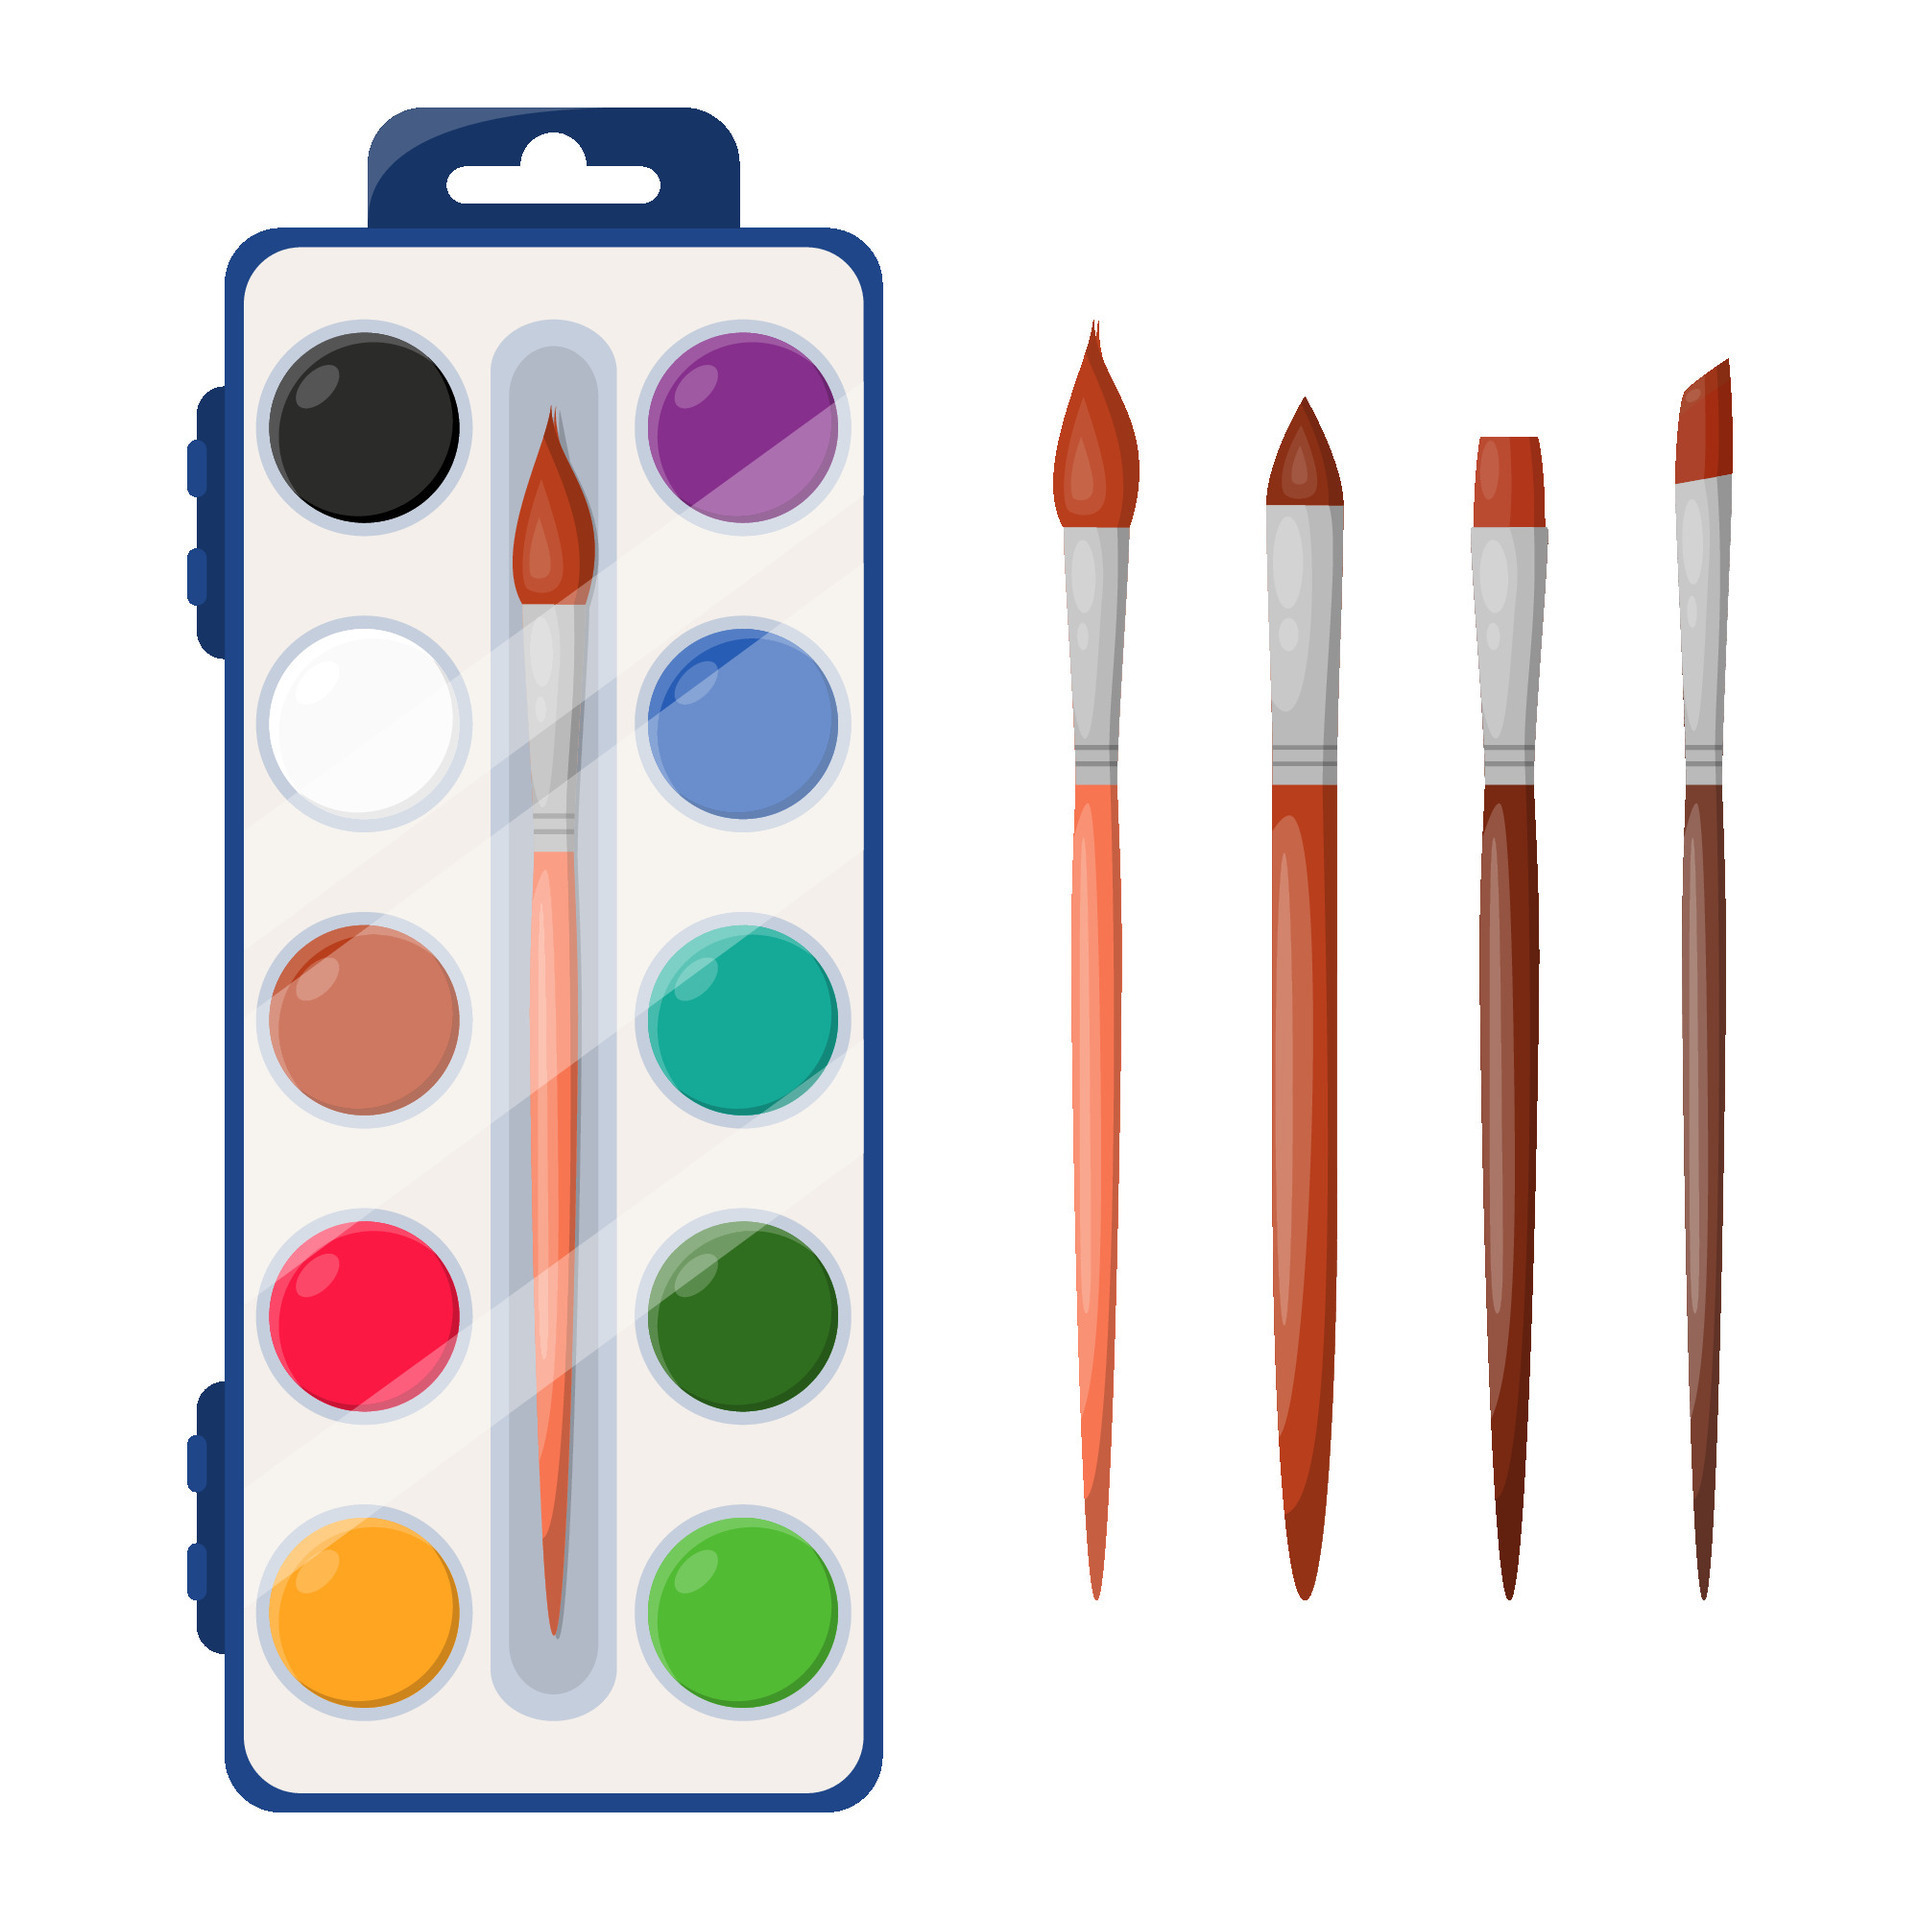 https://static.vecteezy.com/system/resources/previews/027/923/906/original/colored-paint-and-variety-brush-for-art-school-office-workshops-colorful-drawing-tools-for-kids-pupils-and-students-painting-supplies-art-party-back-to-school-and-education-concept-vector.jpg